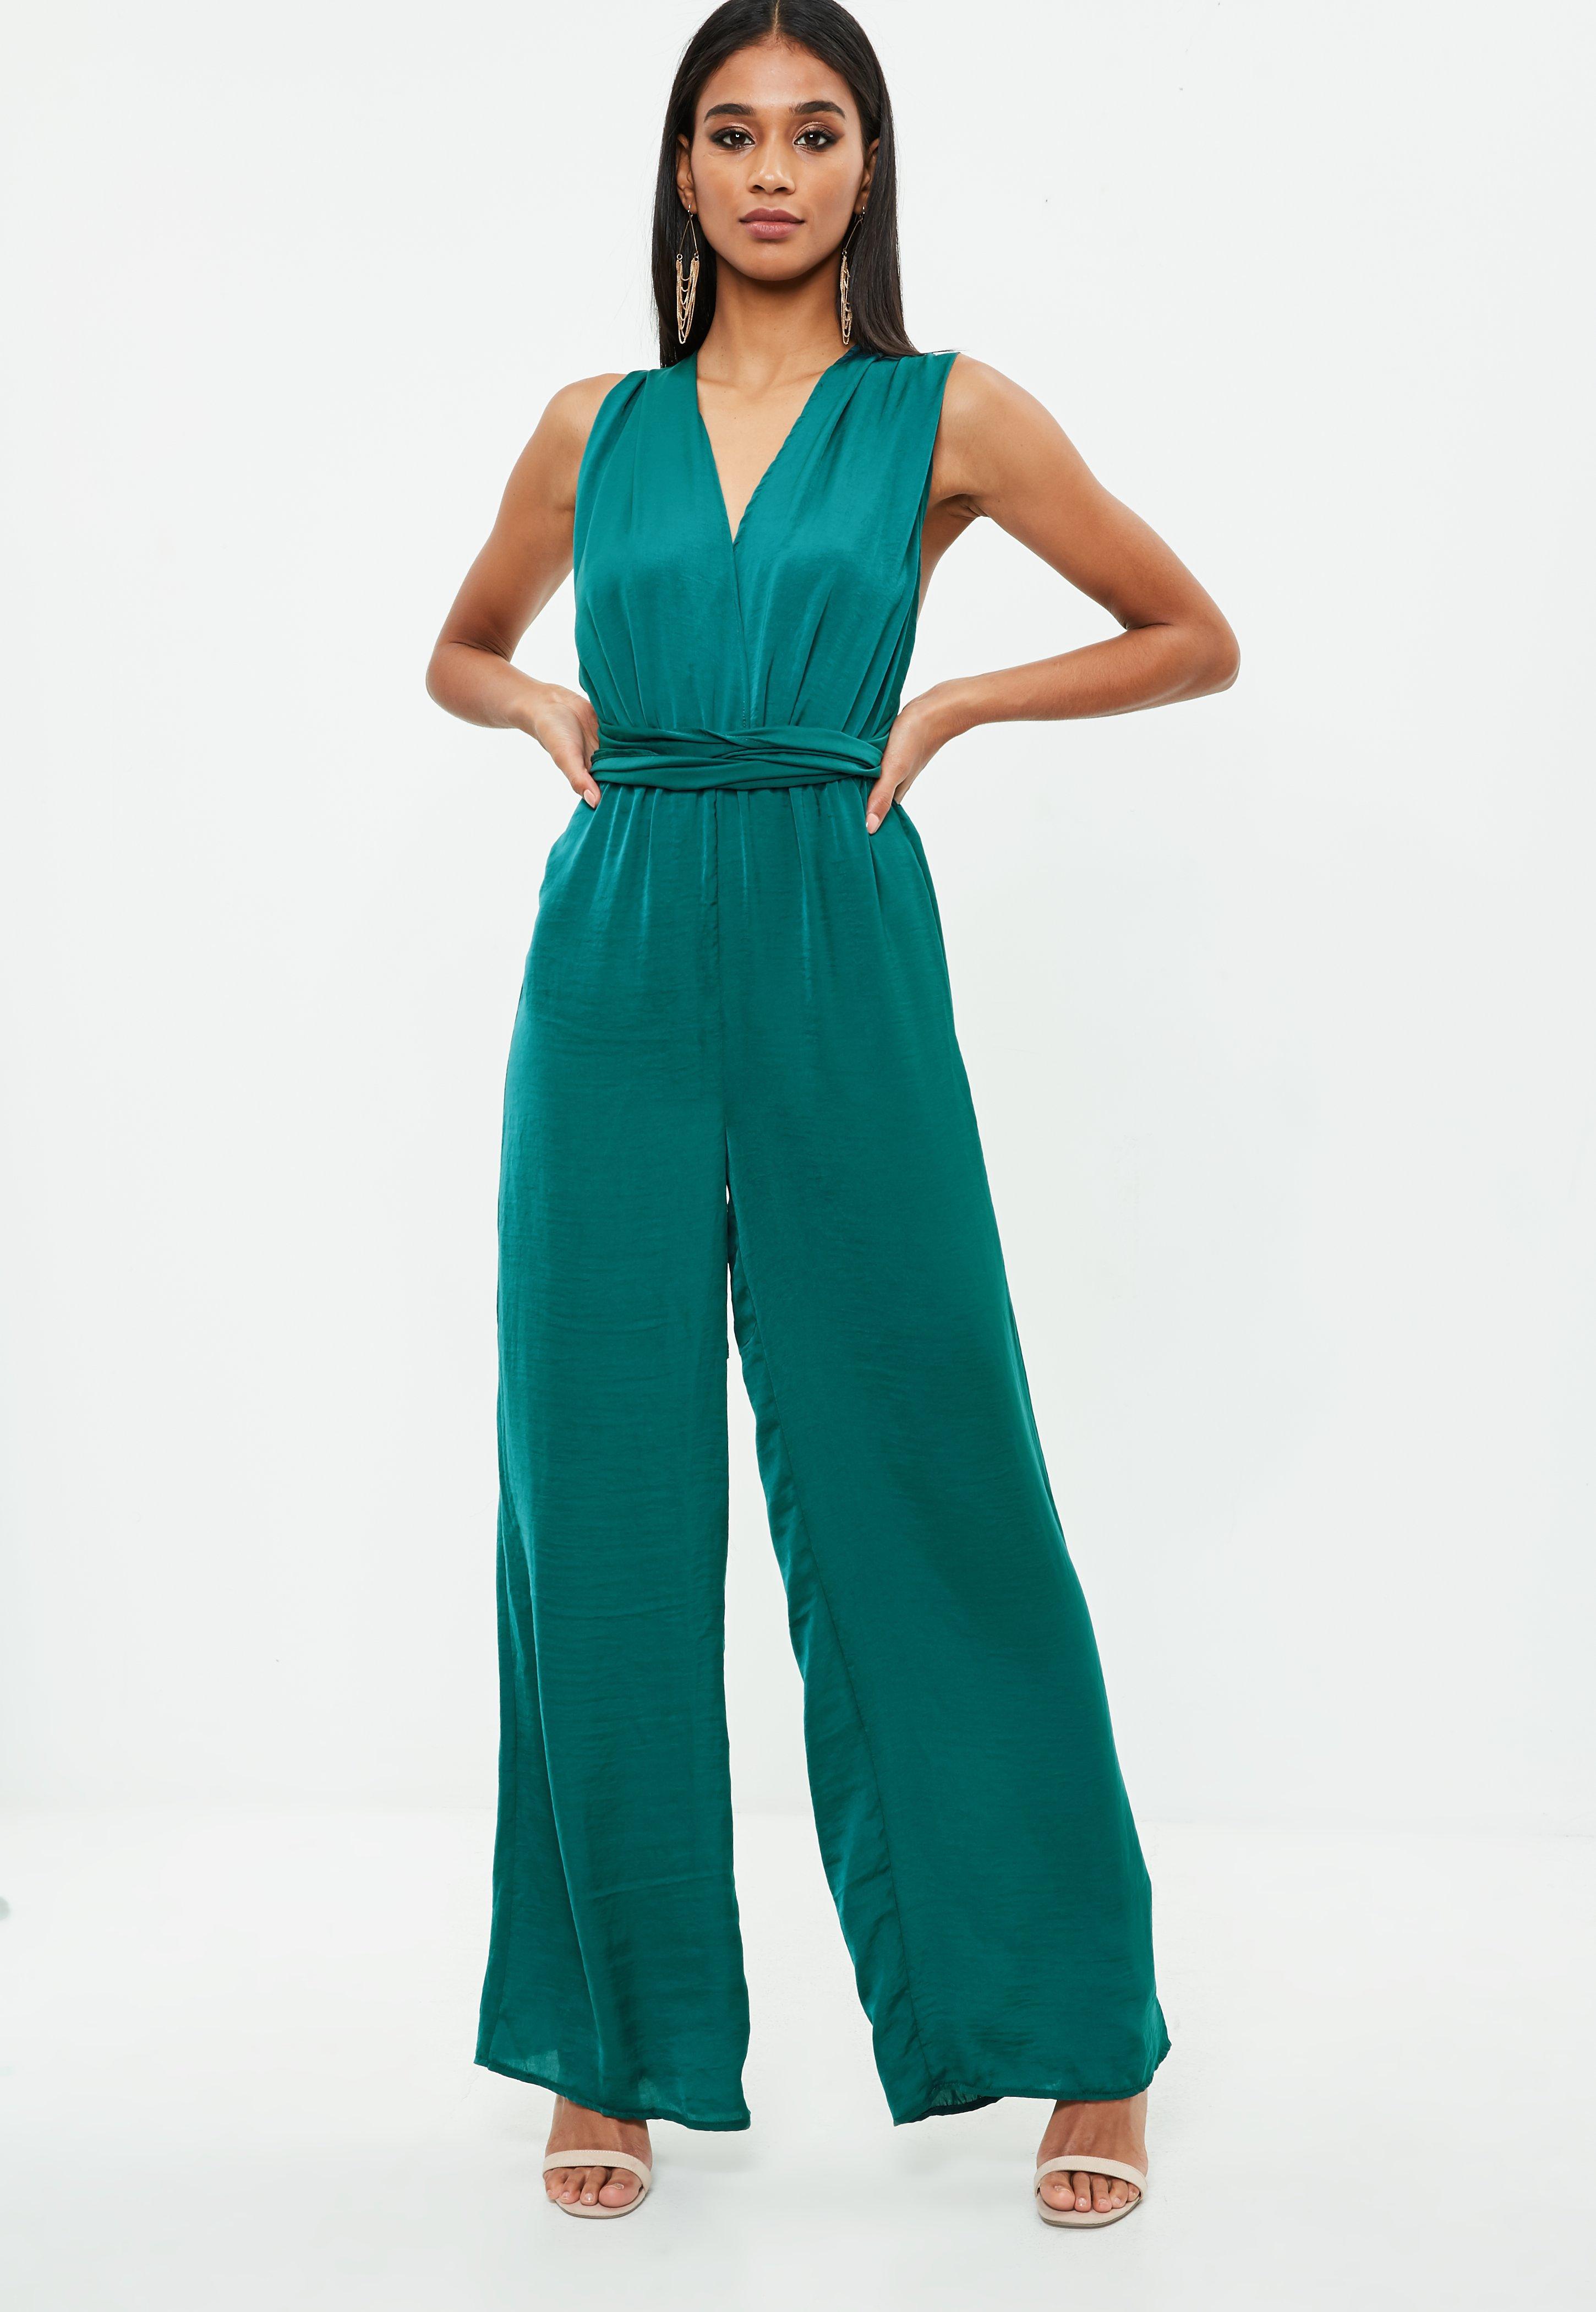 Lyst - Missguided Green Satin Multi Way Wide Leg Jumpsuit in Green